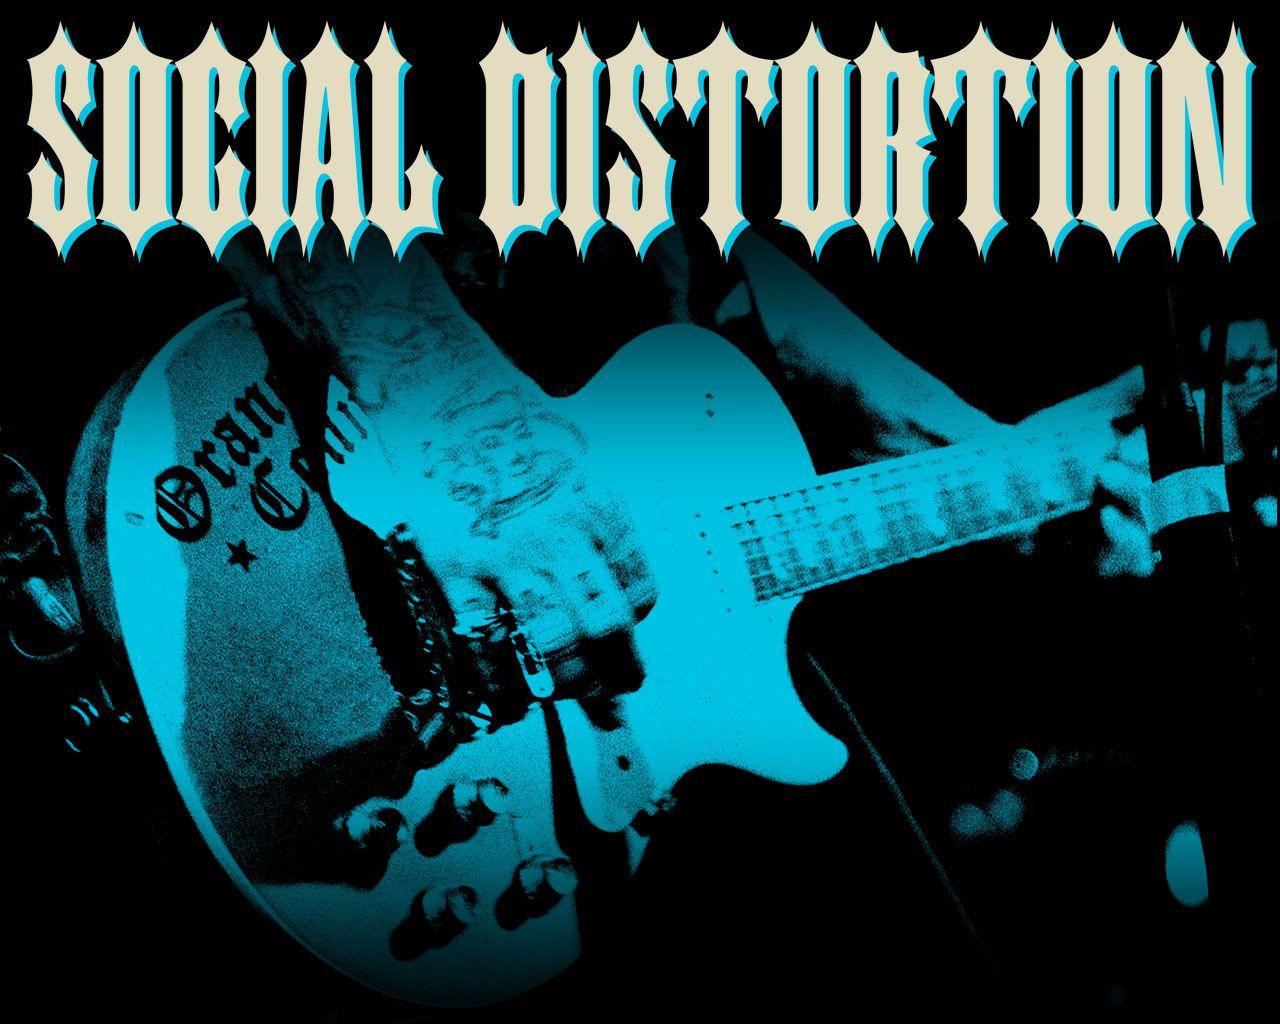 Social Distortion Wallpaper and Background Imagex1024